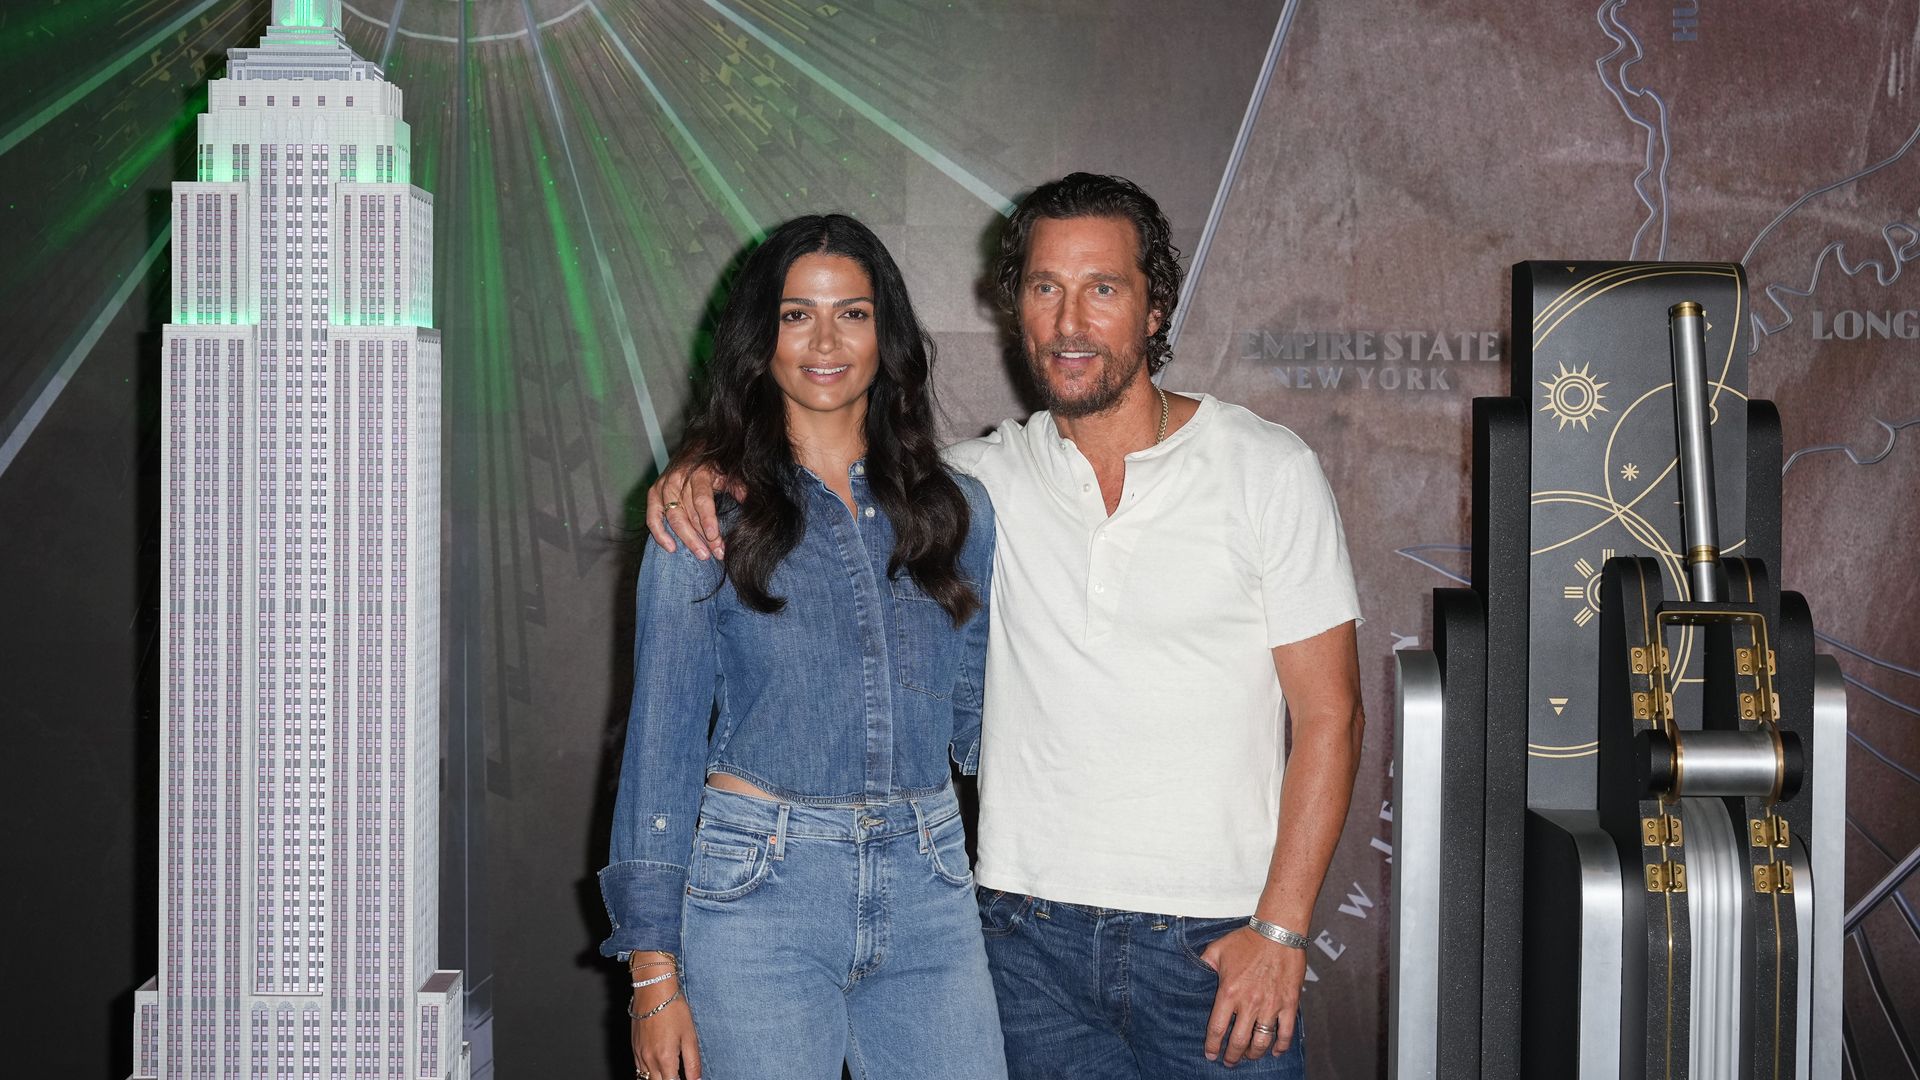 Matthew McConaughey reveals his morning routine with wife Camila Alves: 'It's the difference between marriage and dating'